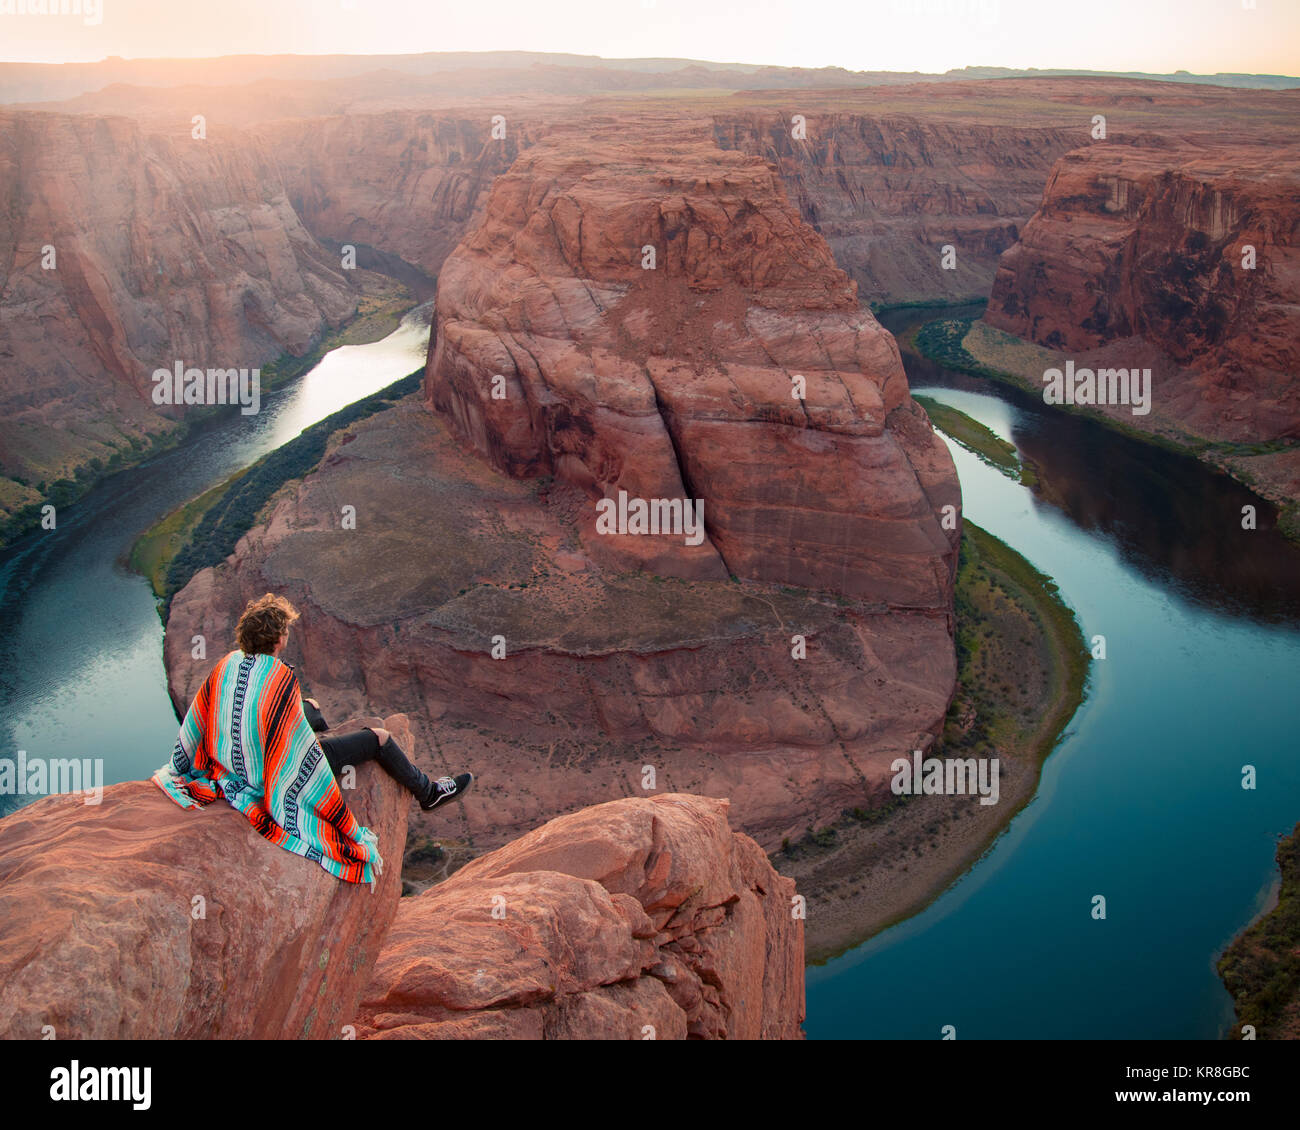 young man sitting on rock ledge over looking the horseshoe bend in Arizona, united states during sunset Stock Photo